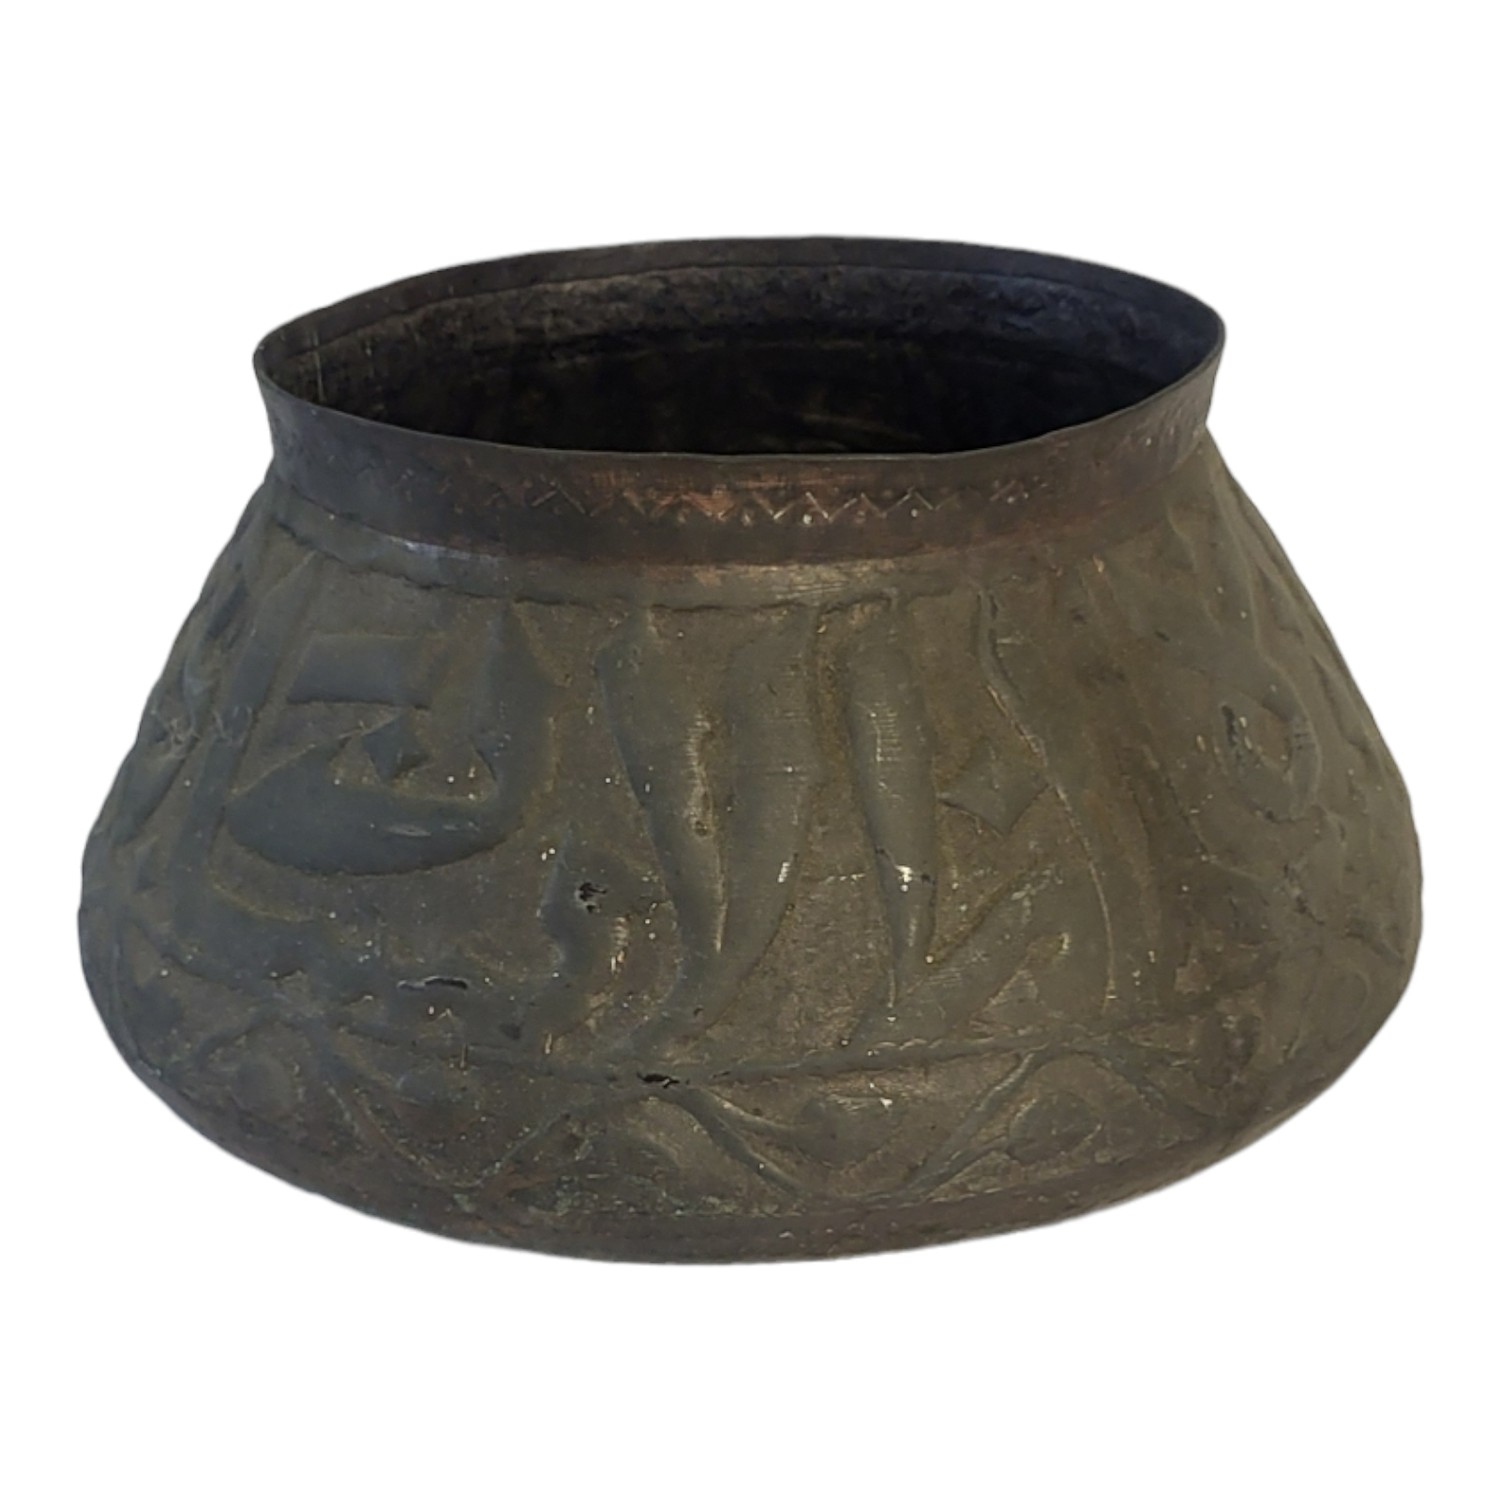 AN ANTIQUE PERSIAN SAFAVID TINNED COPPER BASIN BOWL Decorated in relief with a band of calligraphy - Image 3 of 3